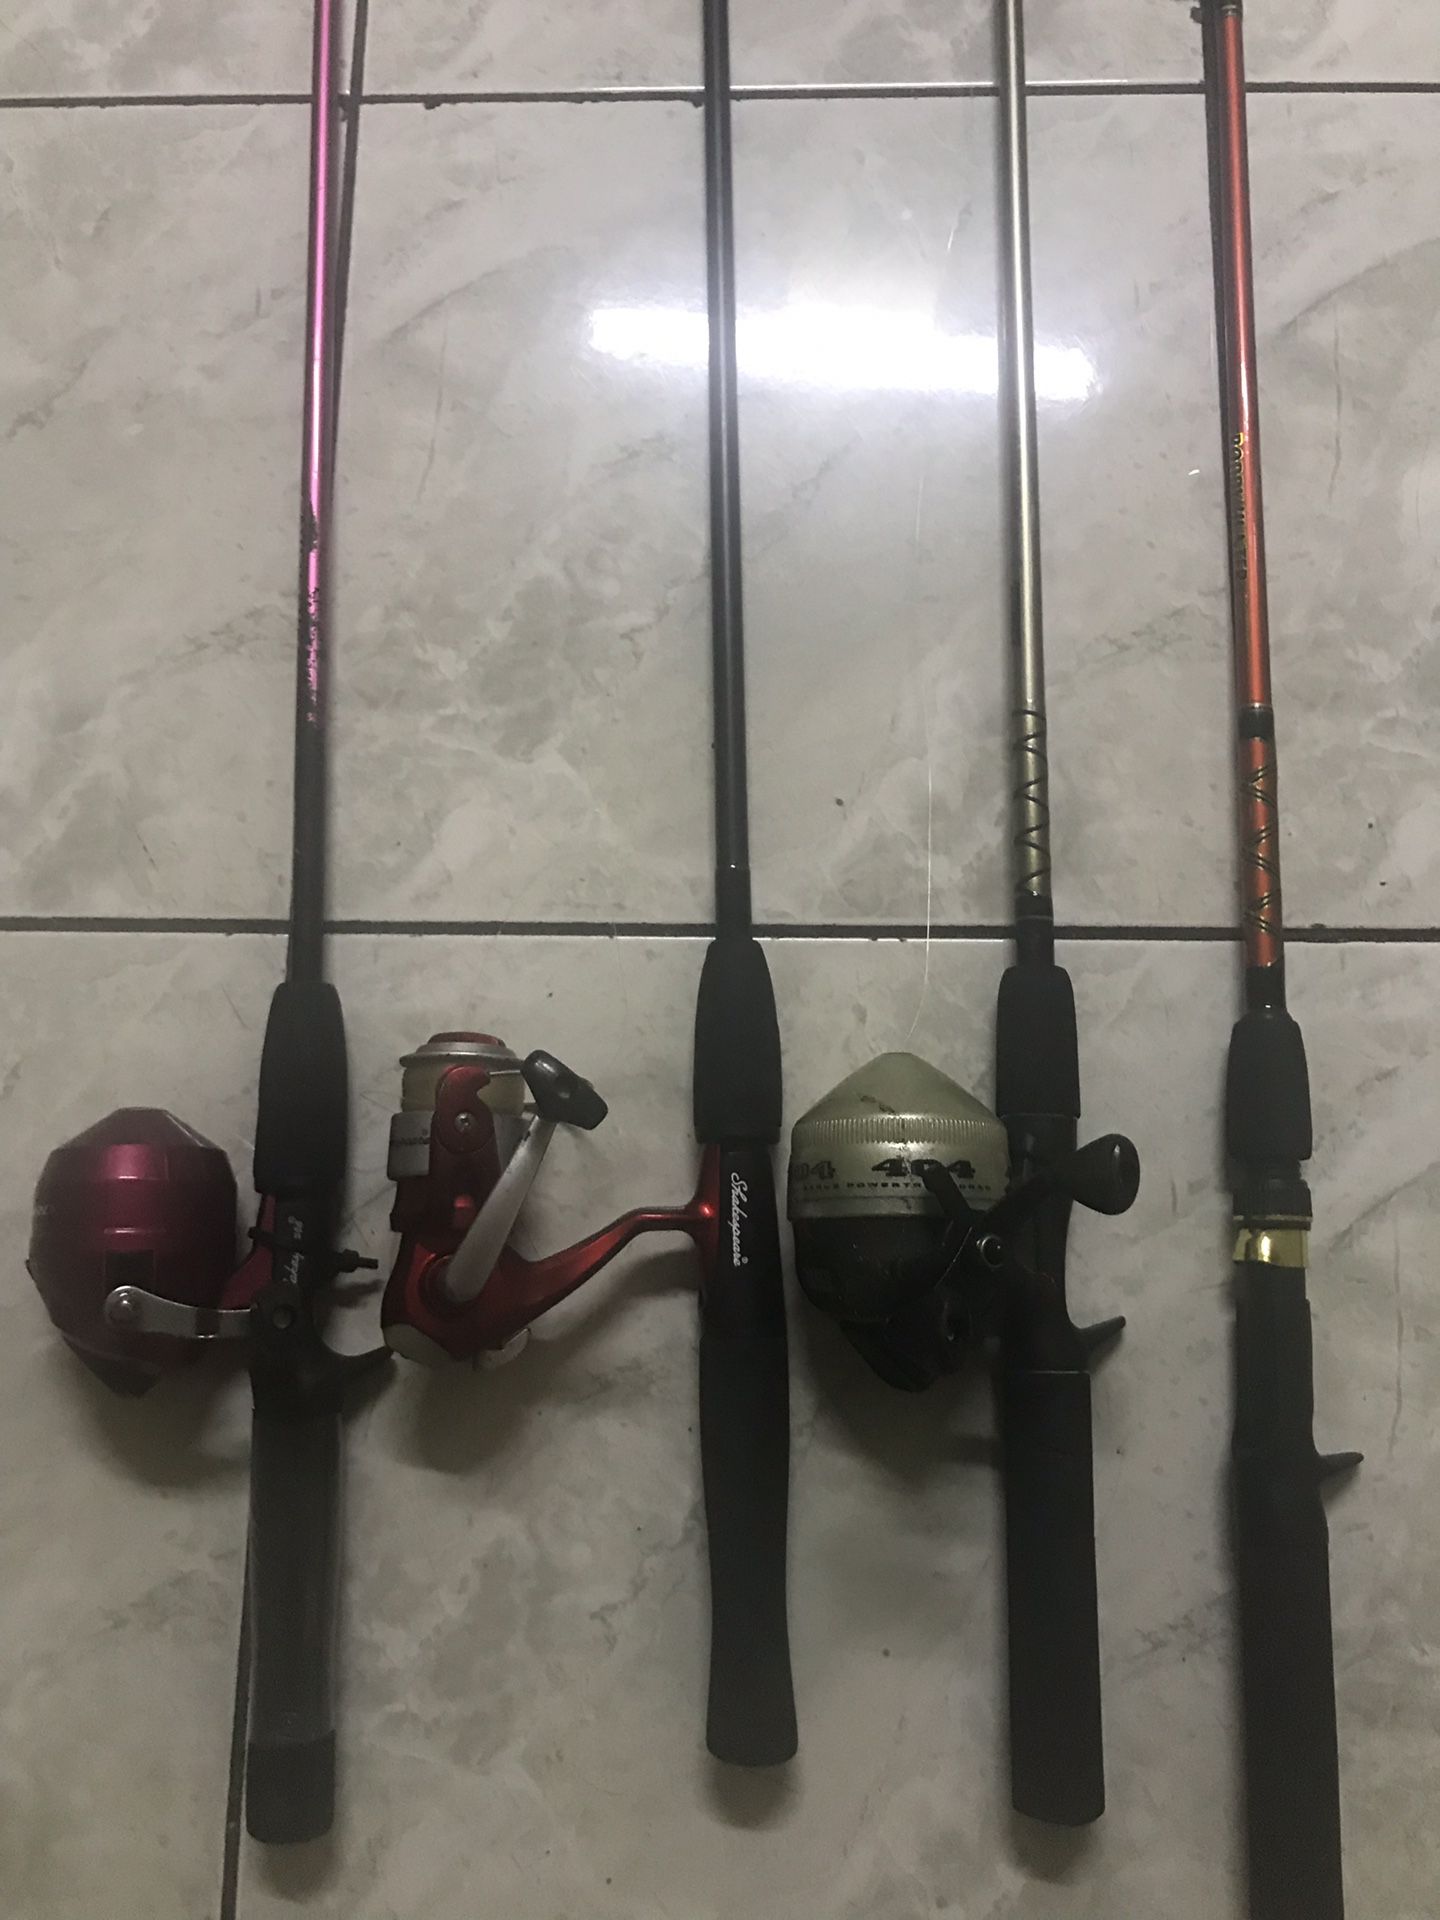 4 trout fishing rods $30 take them all.